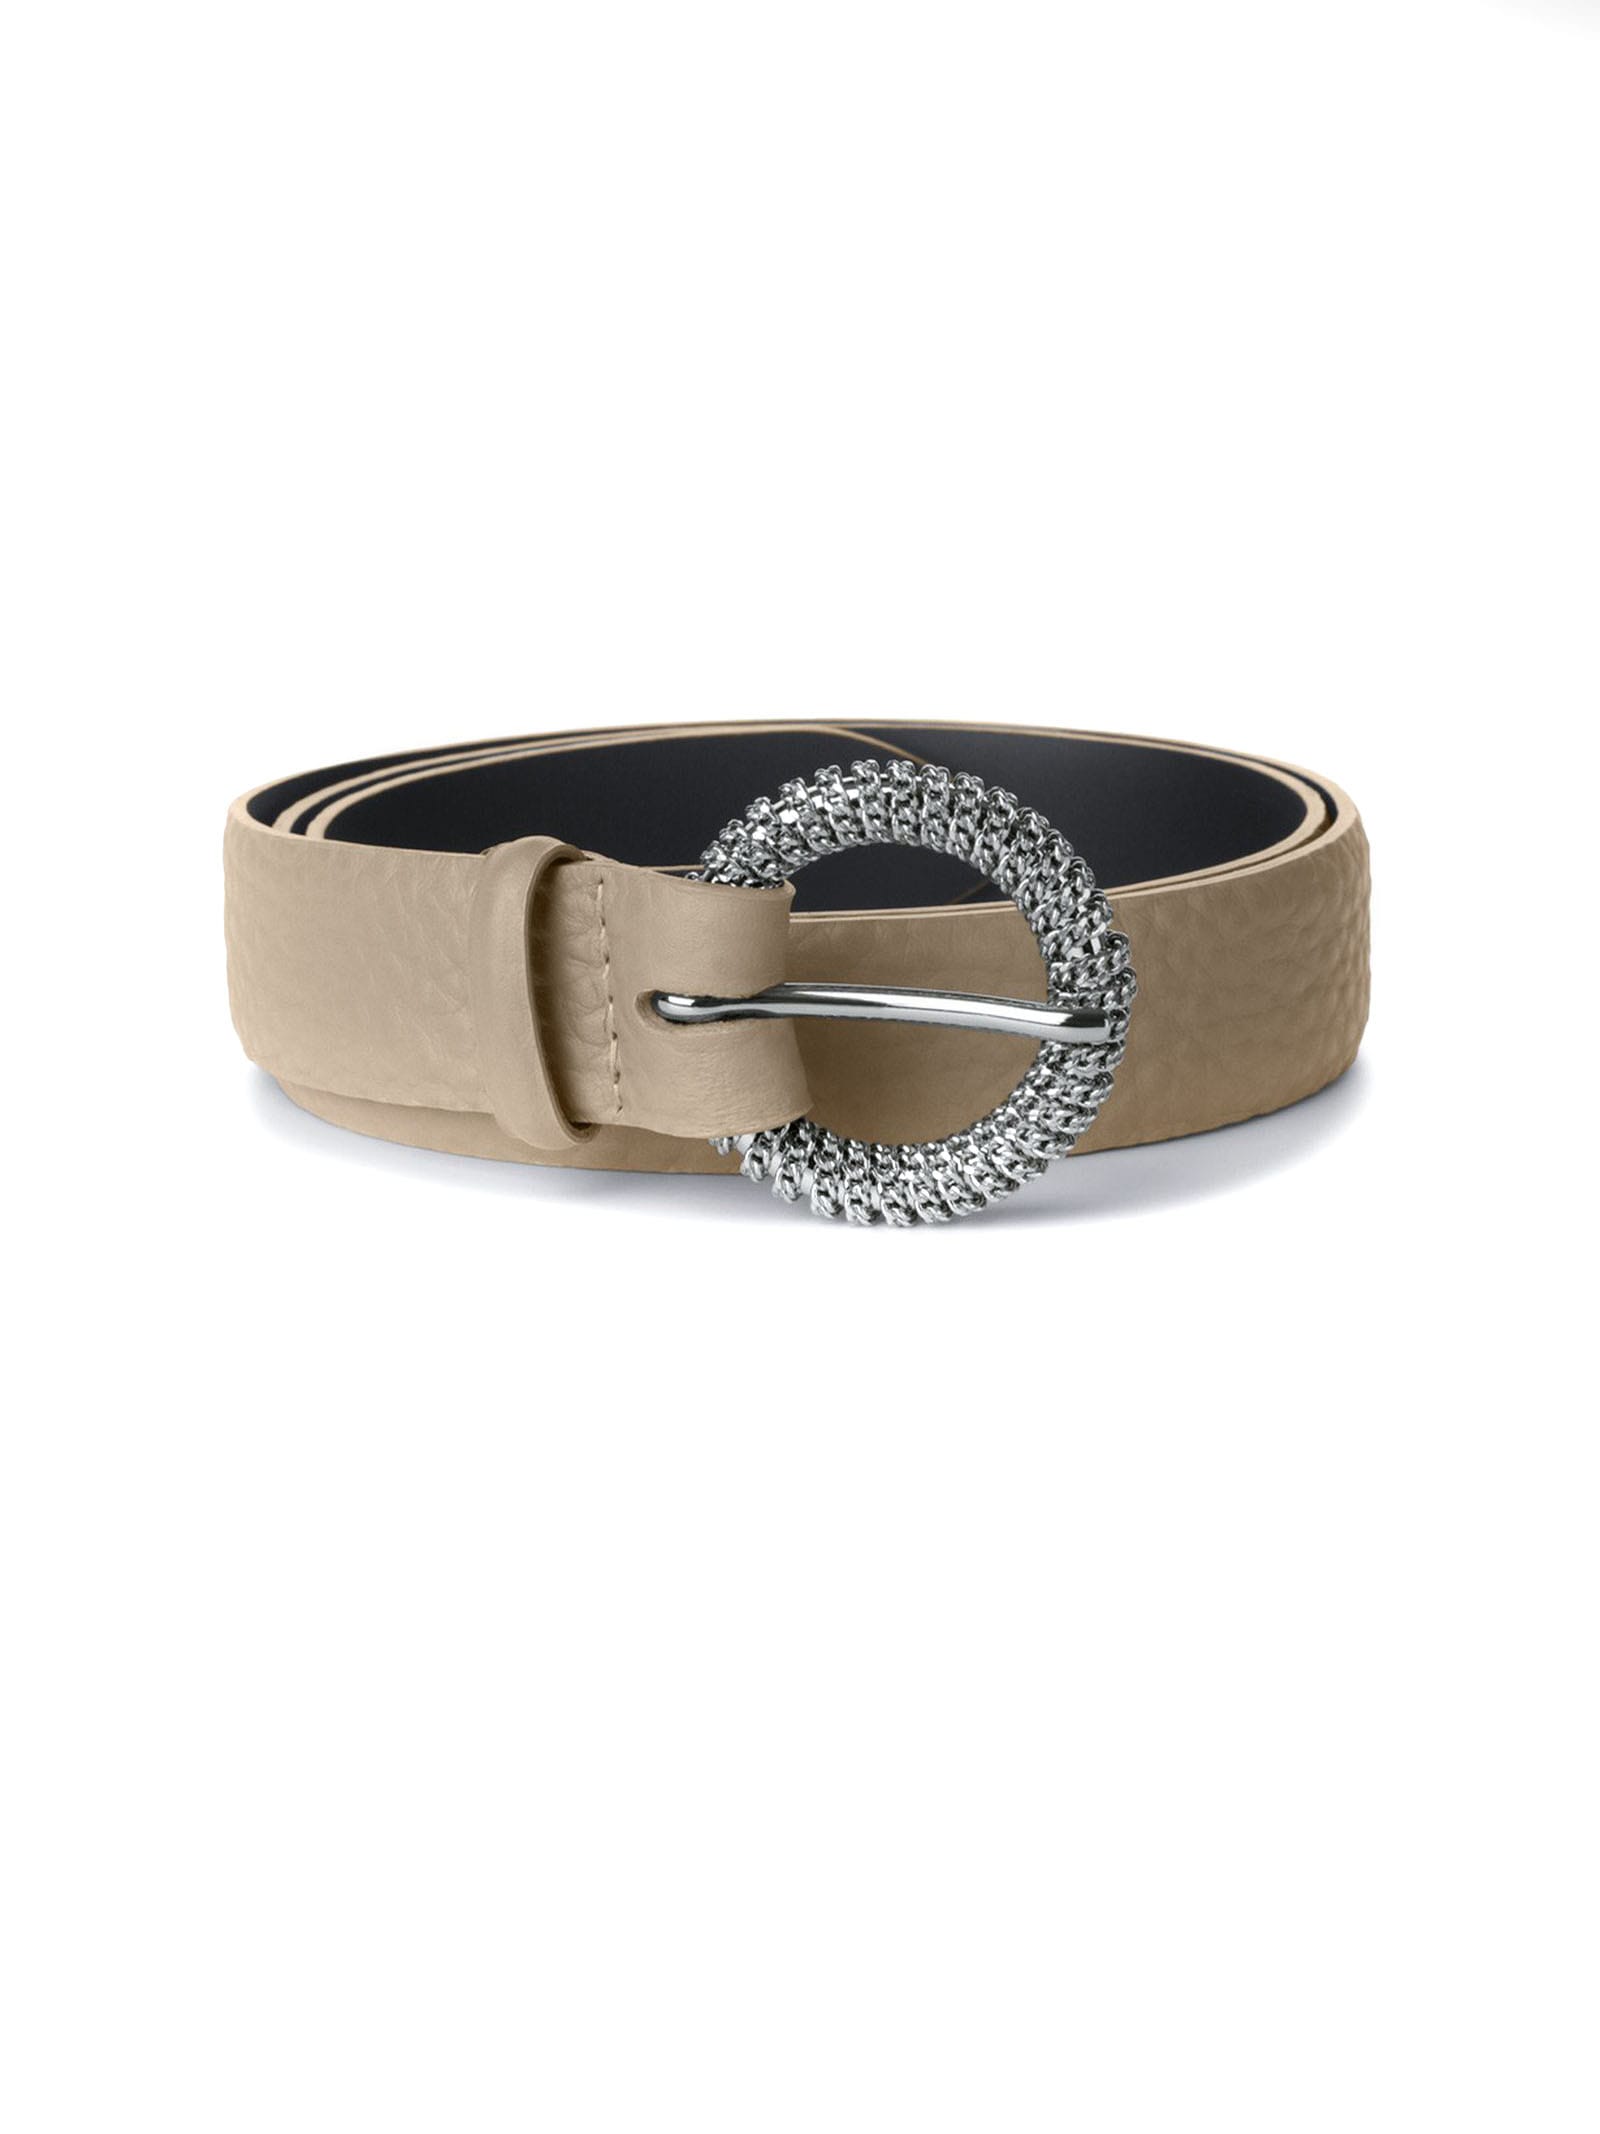 Orciani Soft Chain Buckle Leather Belt In Beige